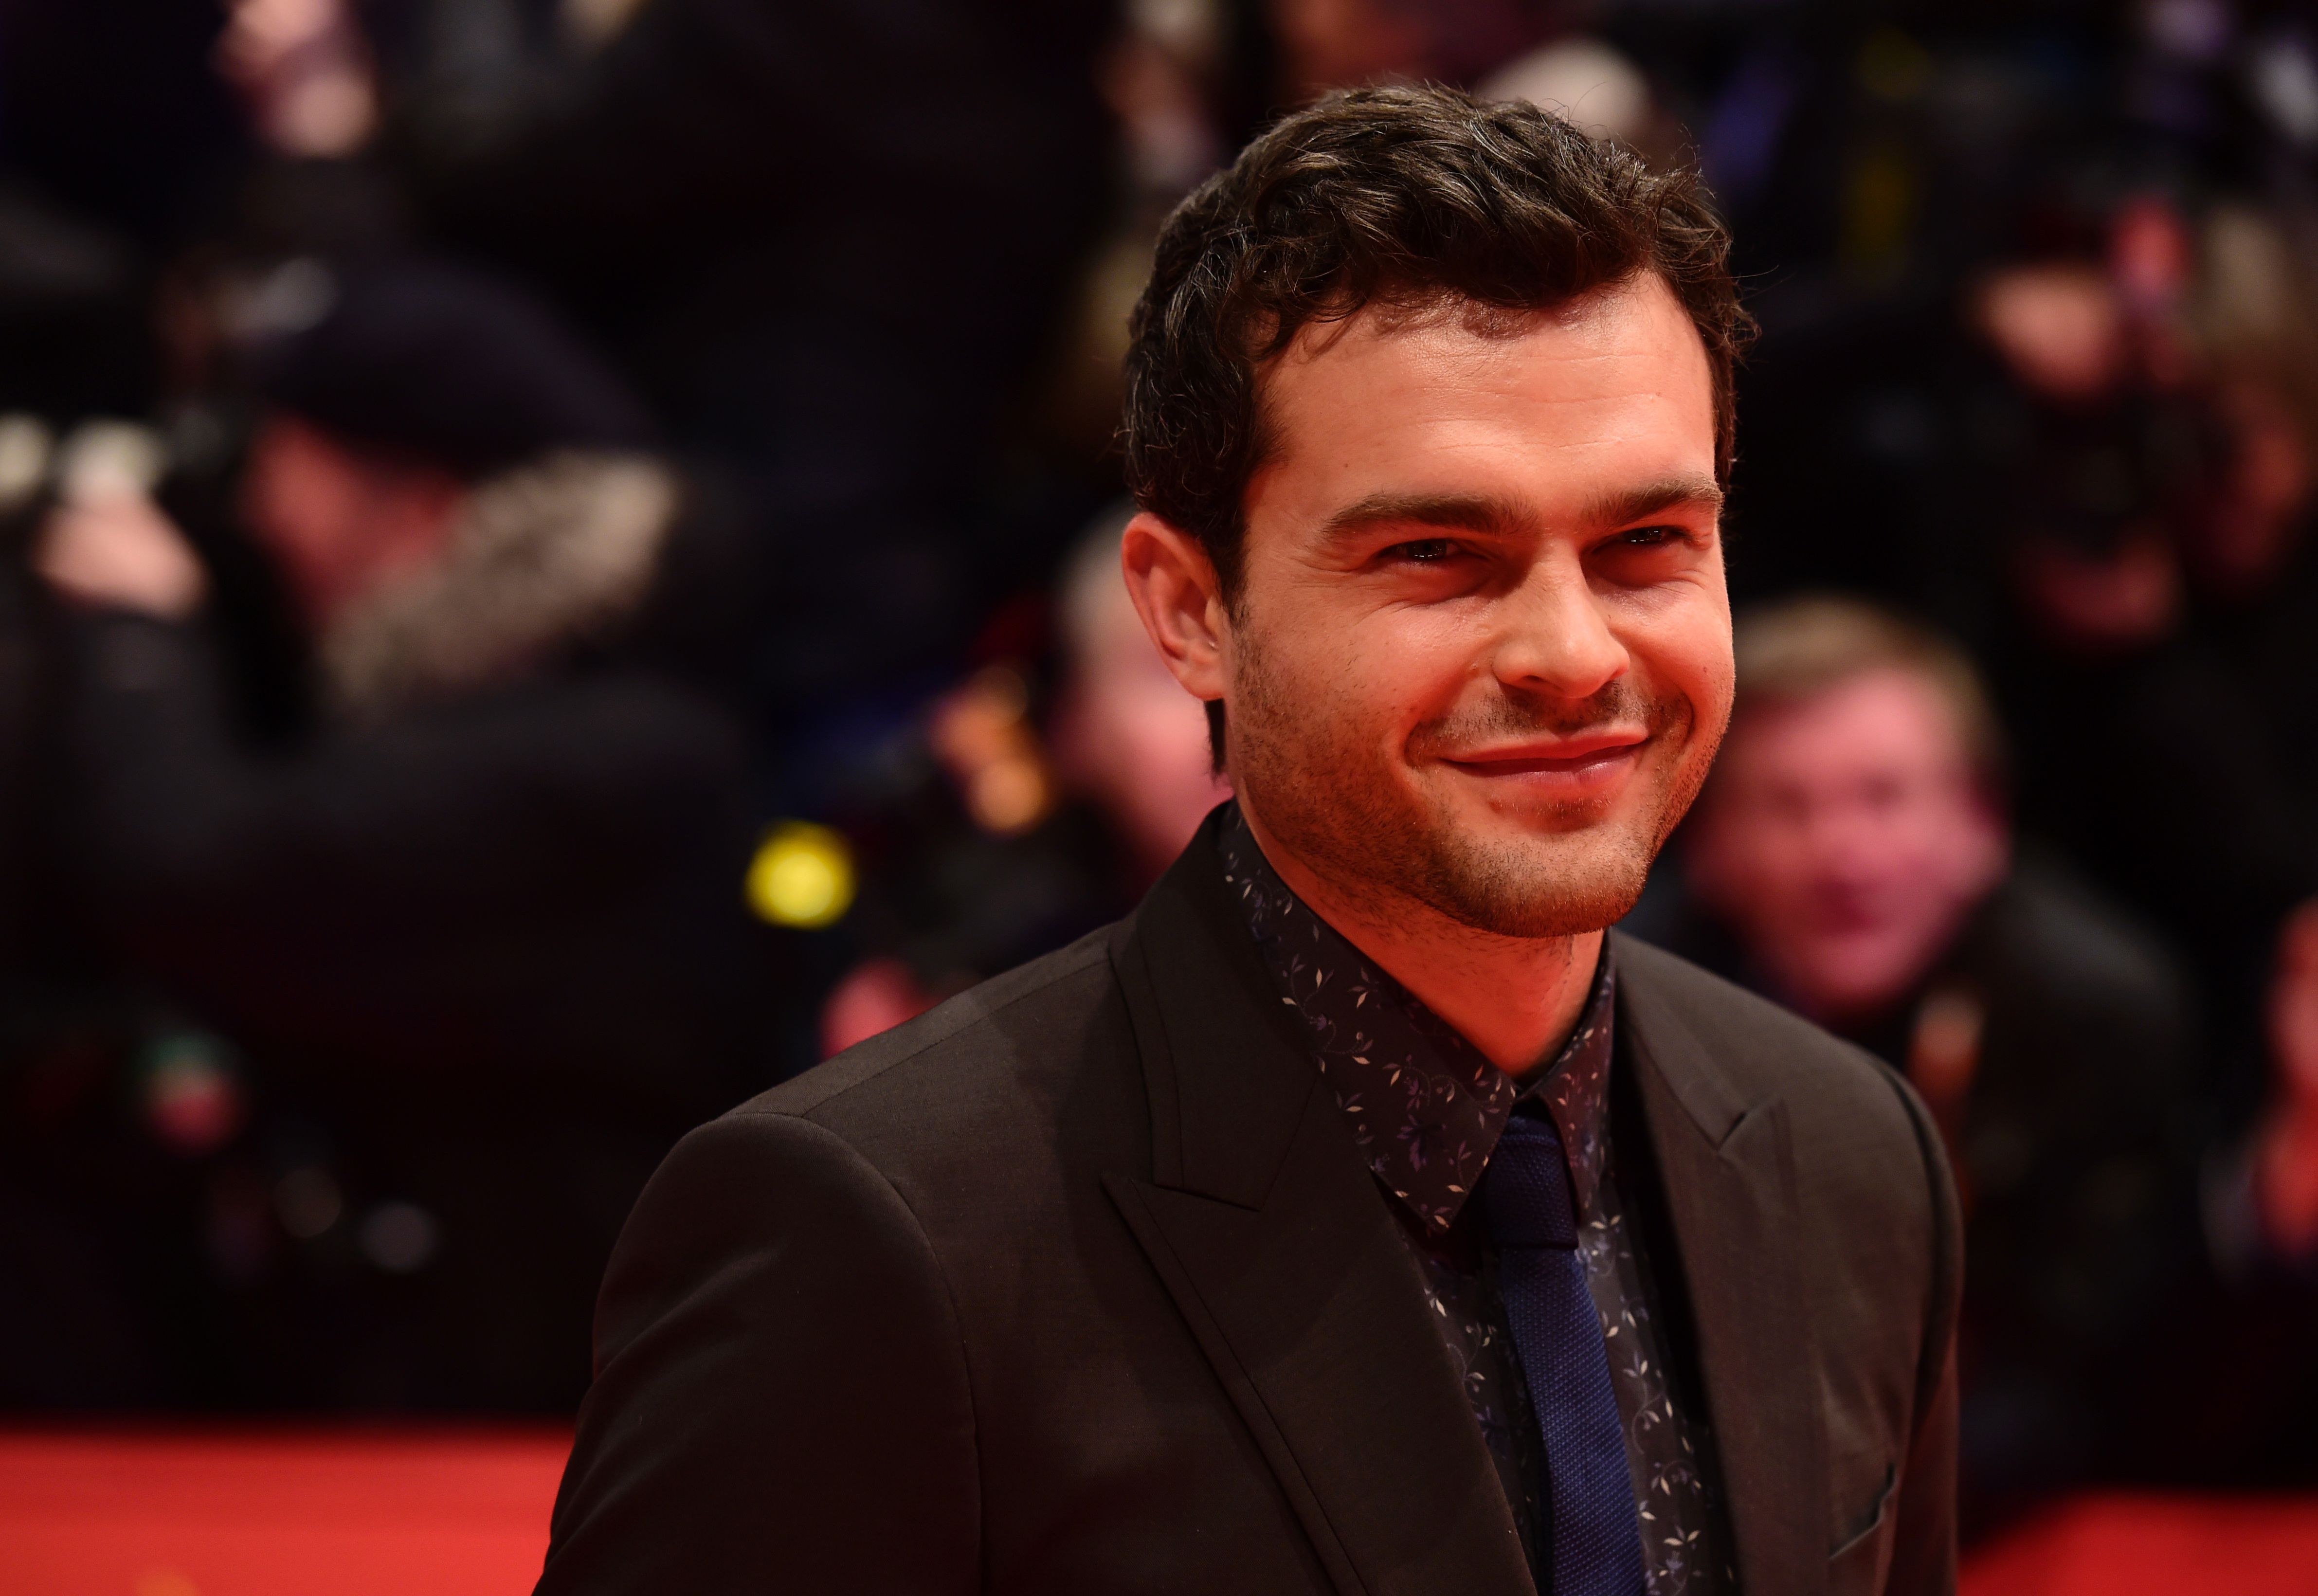 Alden Ehrenreich poses for photographers as he arrives on the red carpet for the film "Hail, Caesar!" screening in Berlin, Feb.11, 2016 (John MacDougall—AFP/Getty Images)